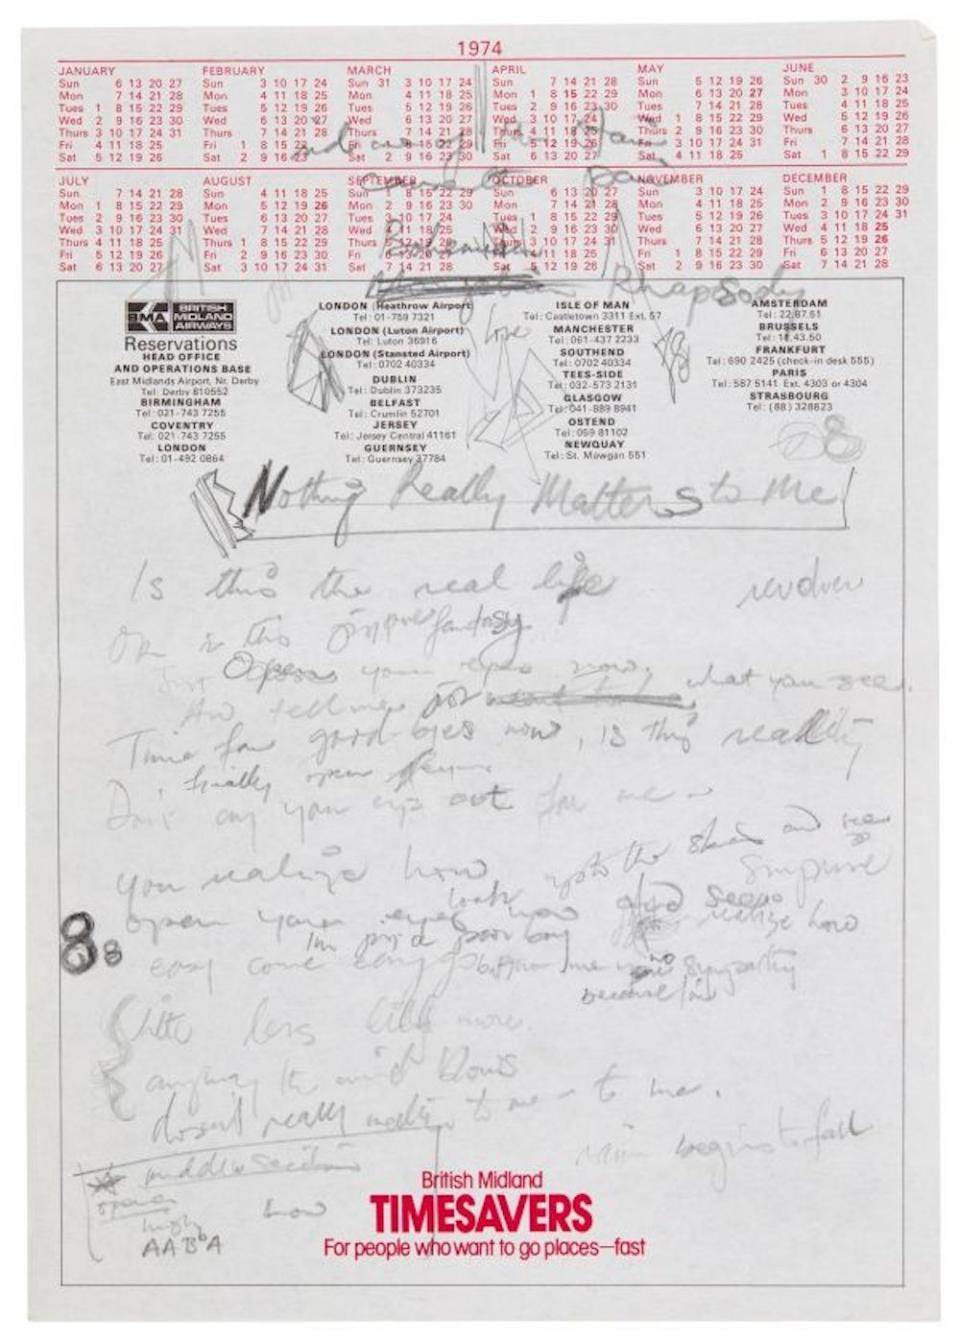 A draft of Queen’s ‘Bohemian Rhapsody’ that contains what appears to be the early title of ‘Mongolian Rhapsody.’